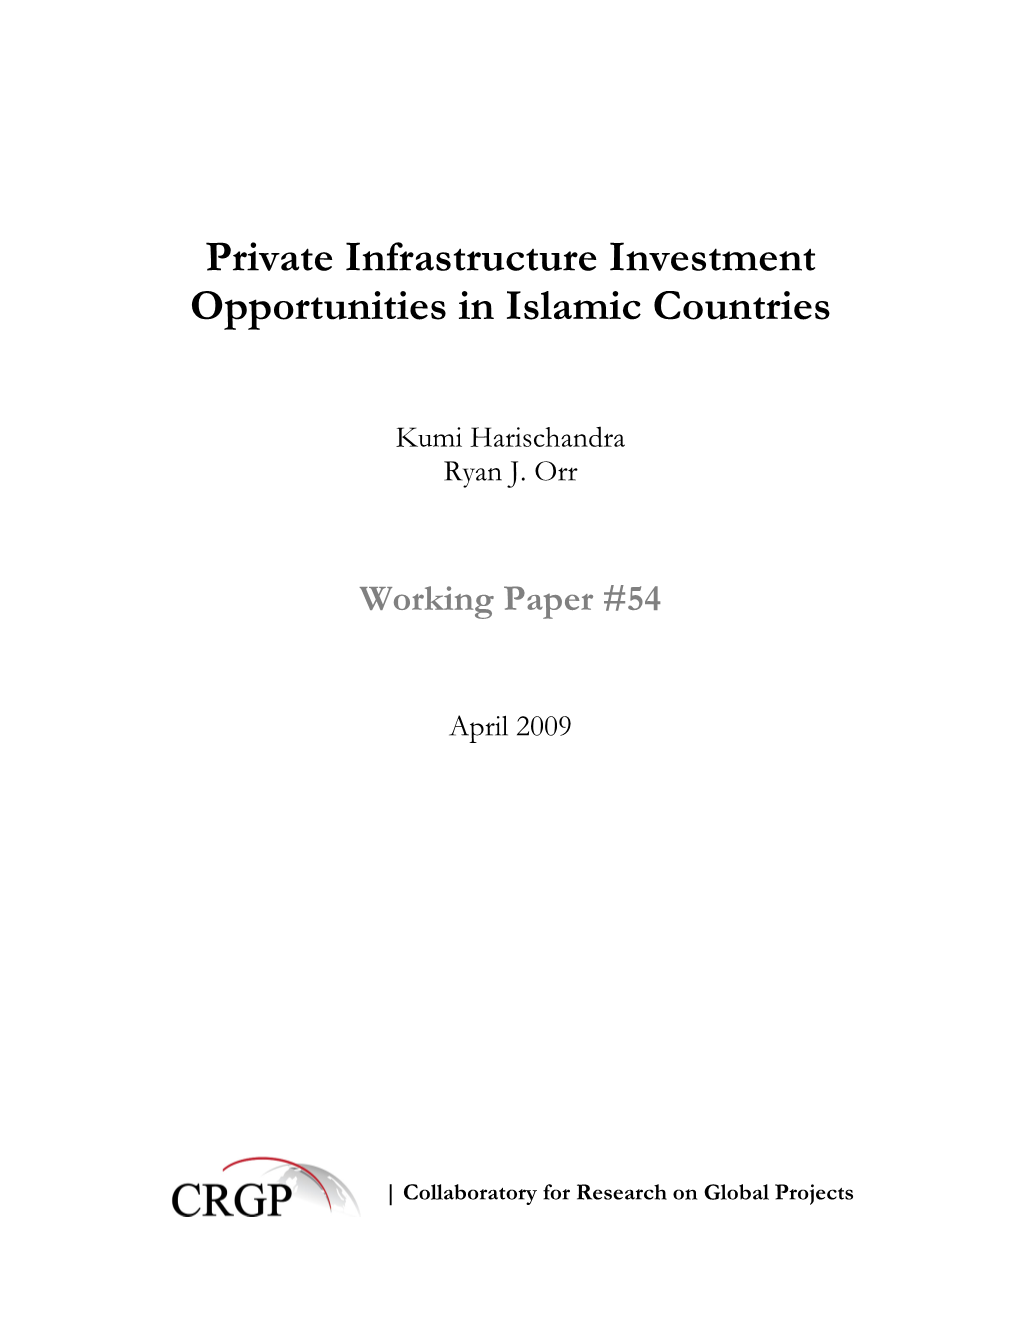 Private Infrastructure Investment Opportunities in Islamic Countries